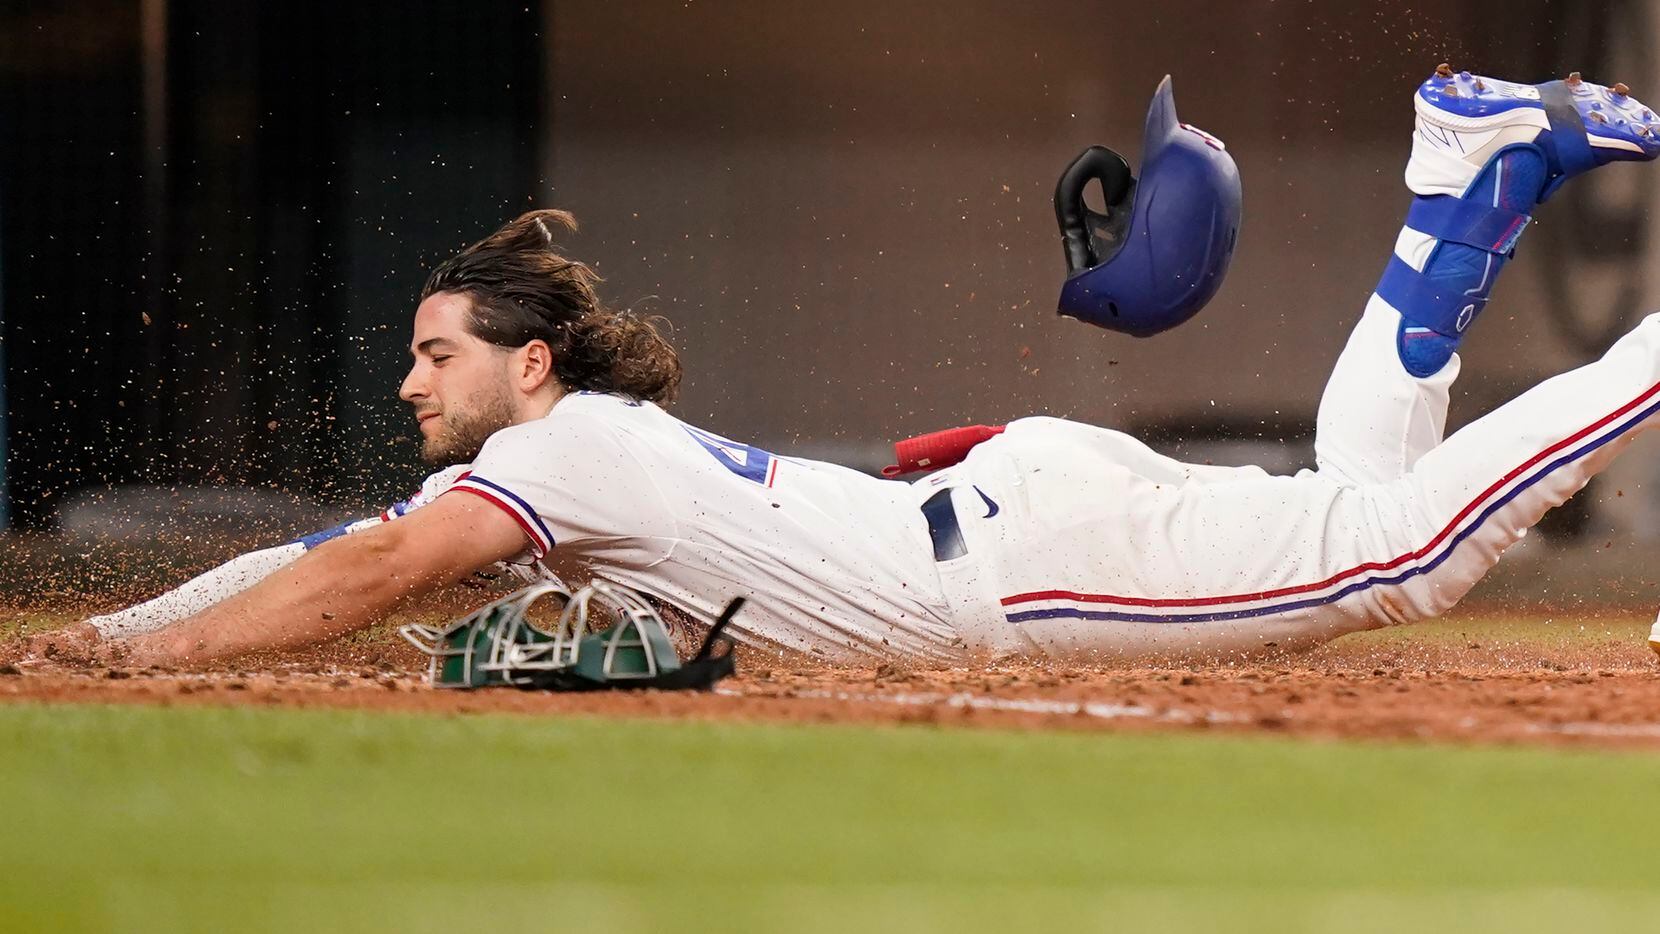 Texas Rangers Josh Smith slides safely into home plate for an inside-the-park home run...